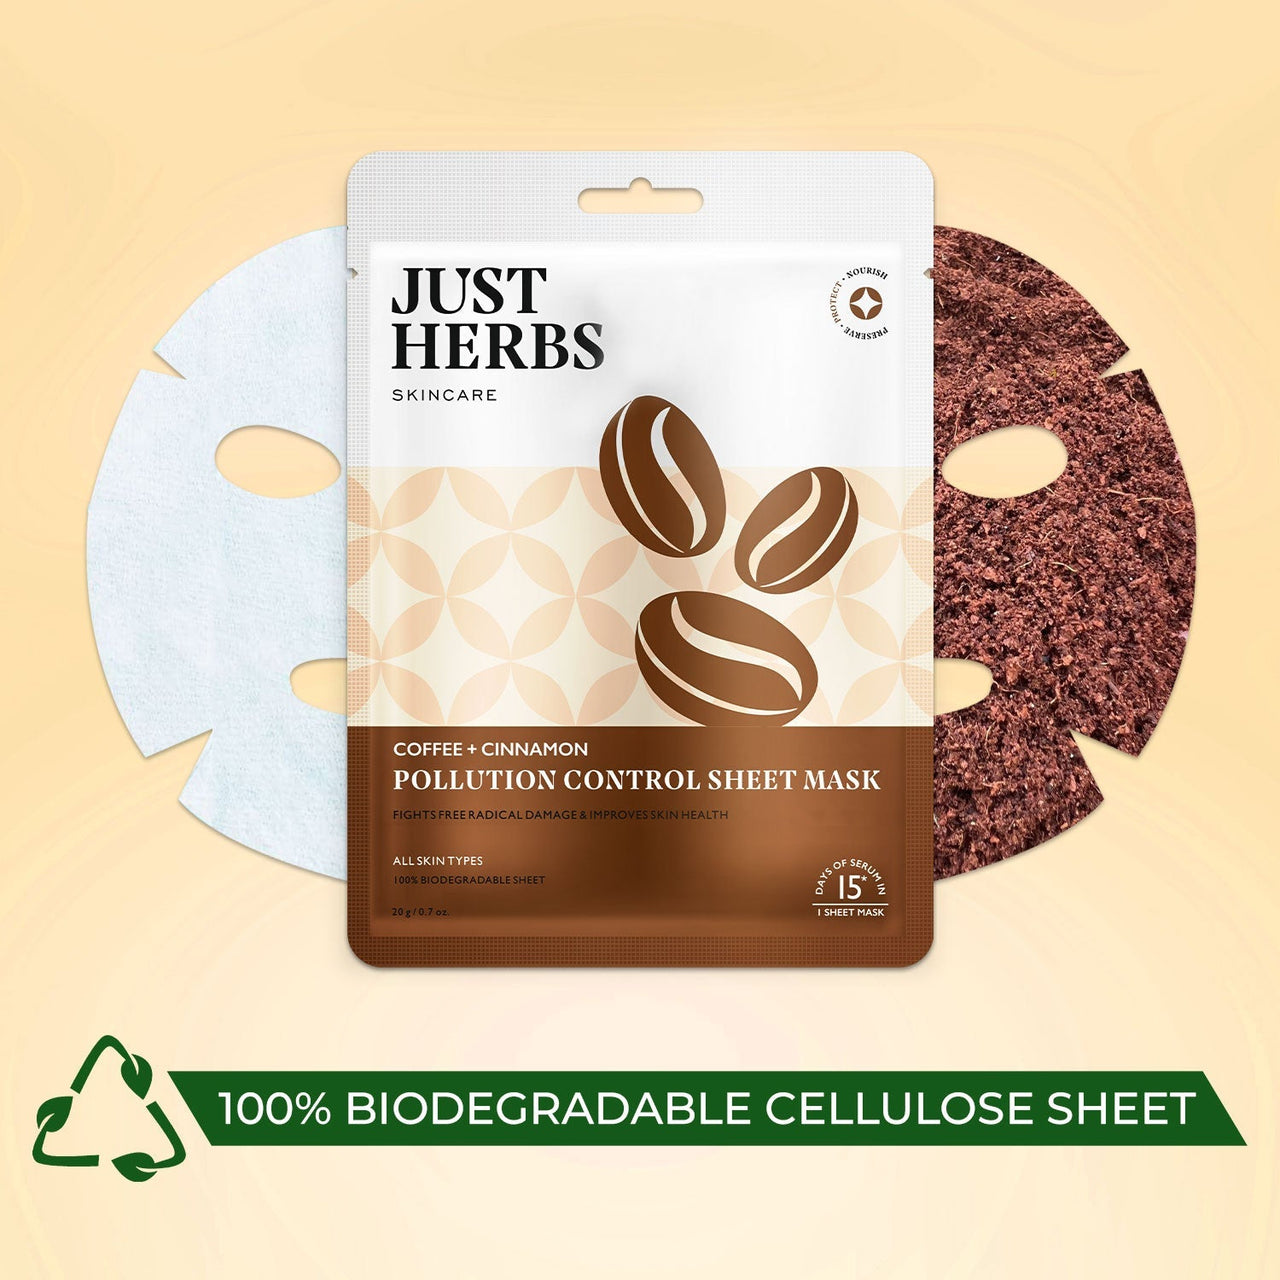 Coffee Sheet Mask with Cinnamon For Pollution Control - Pack of 1